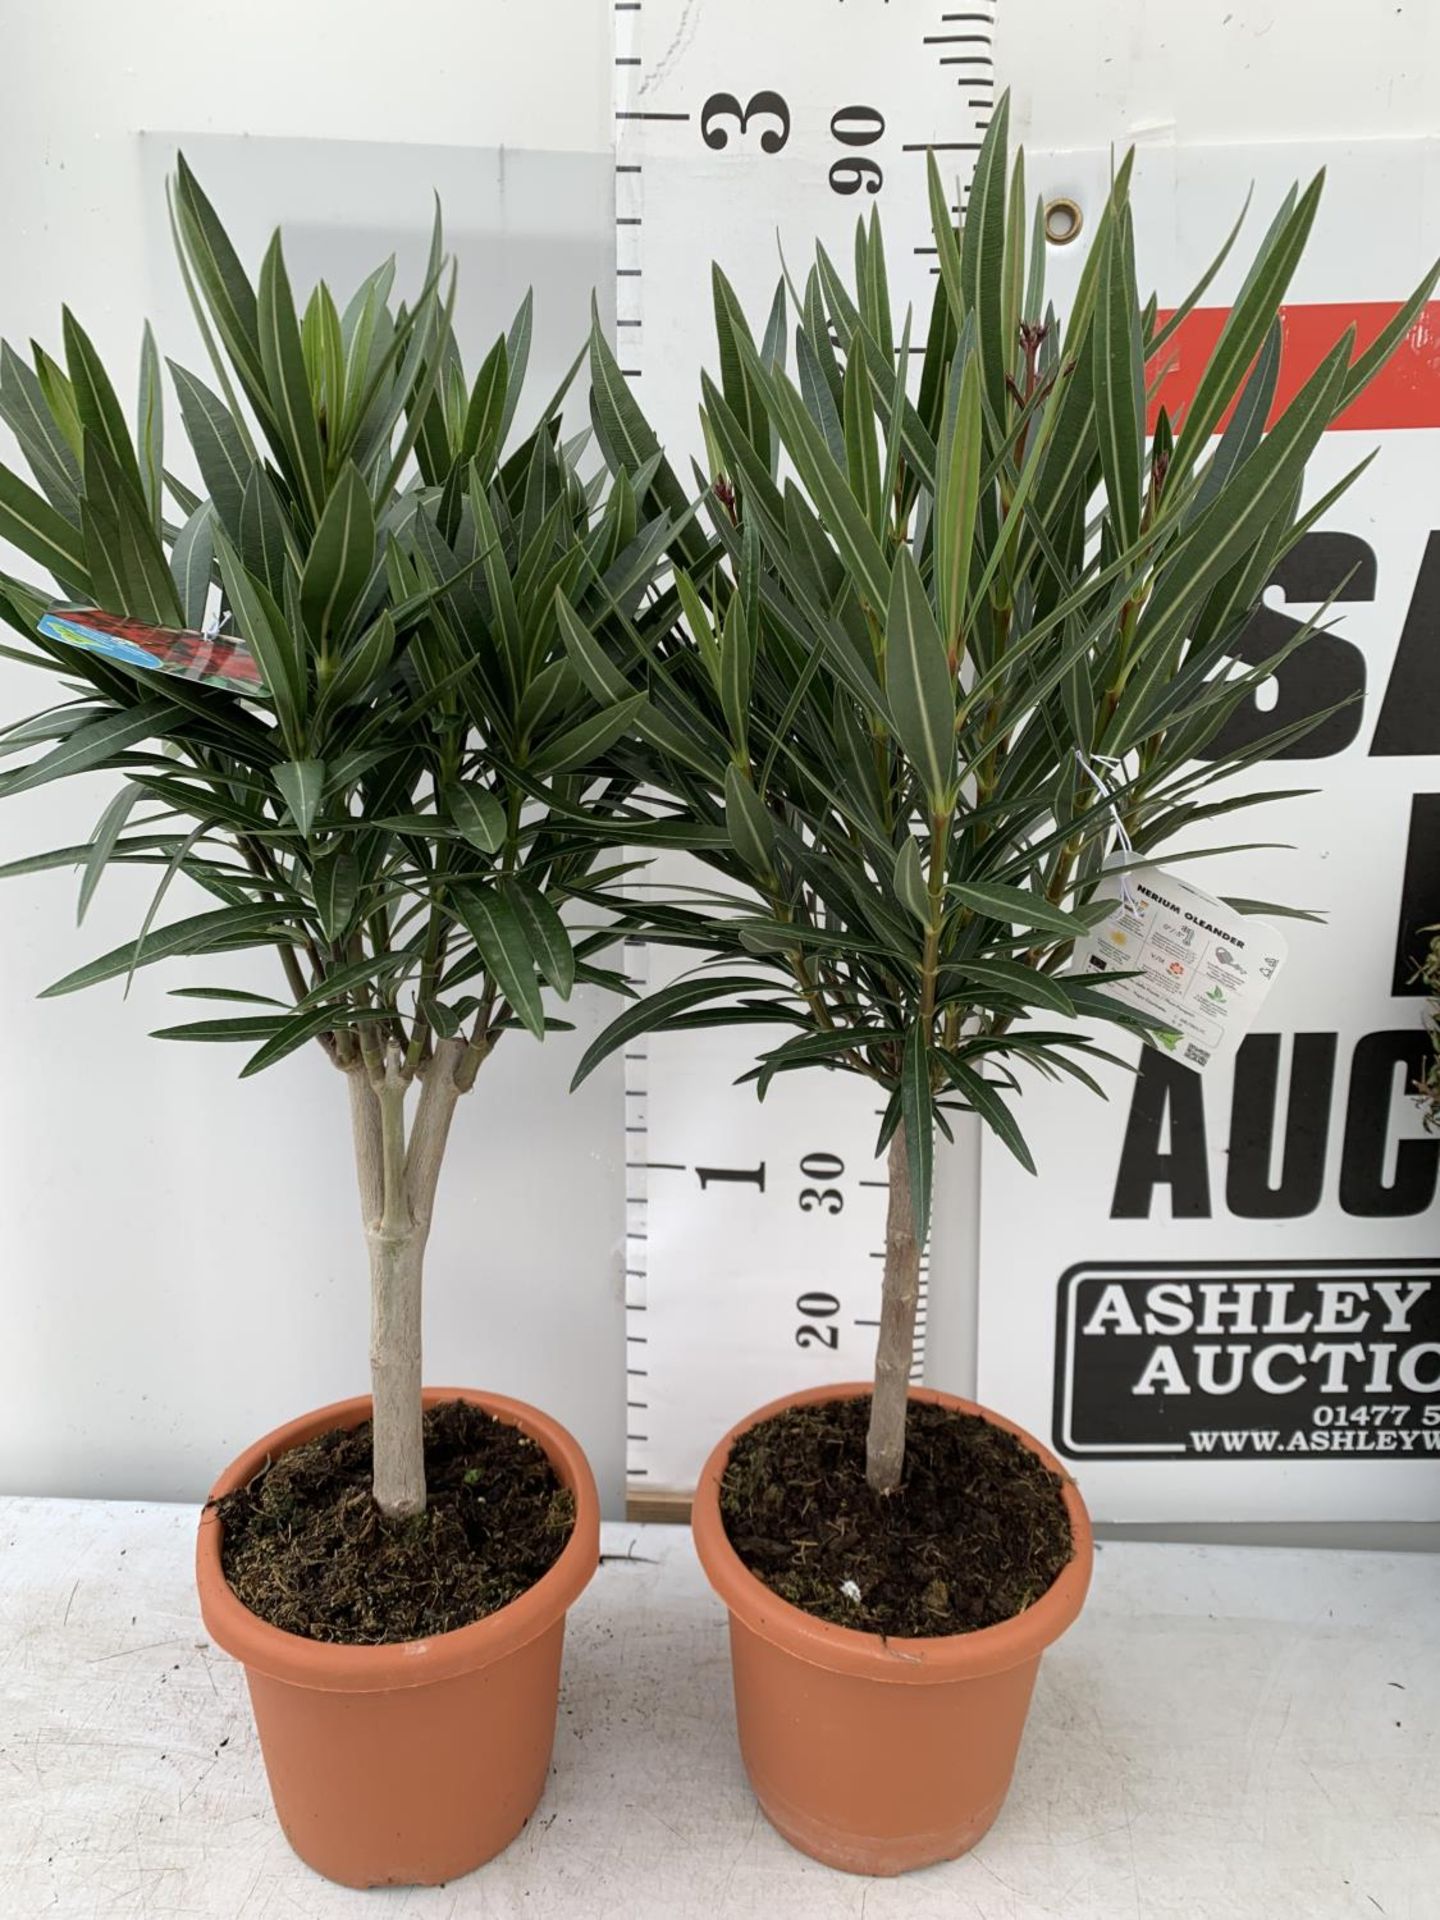 TWO OLEANDER STANDARD NERIUMS RED 'PAPA GAMBETTA' AND 'JANNOCH' IN 4 LTR POTS APPROX 90CM IN